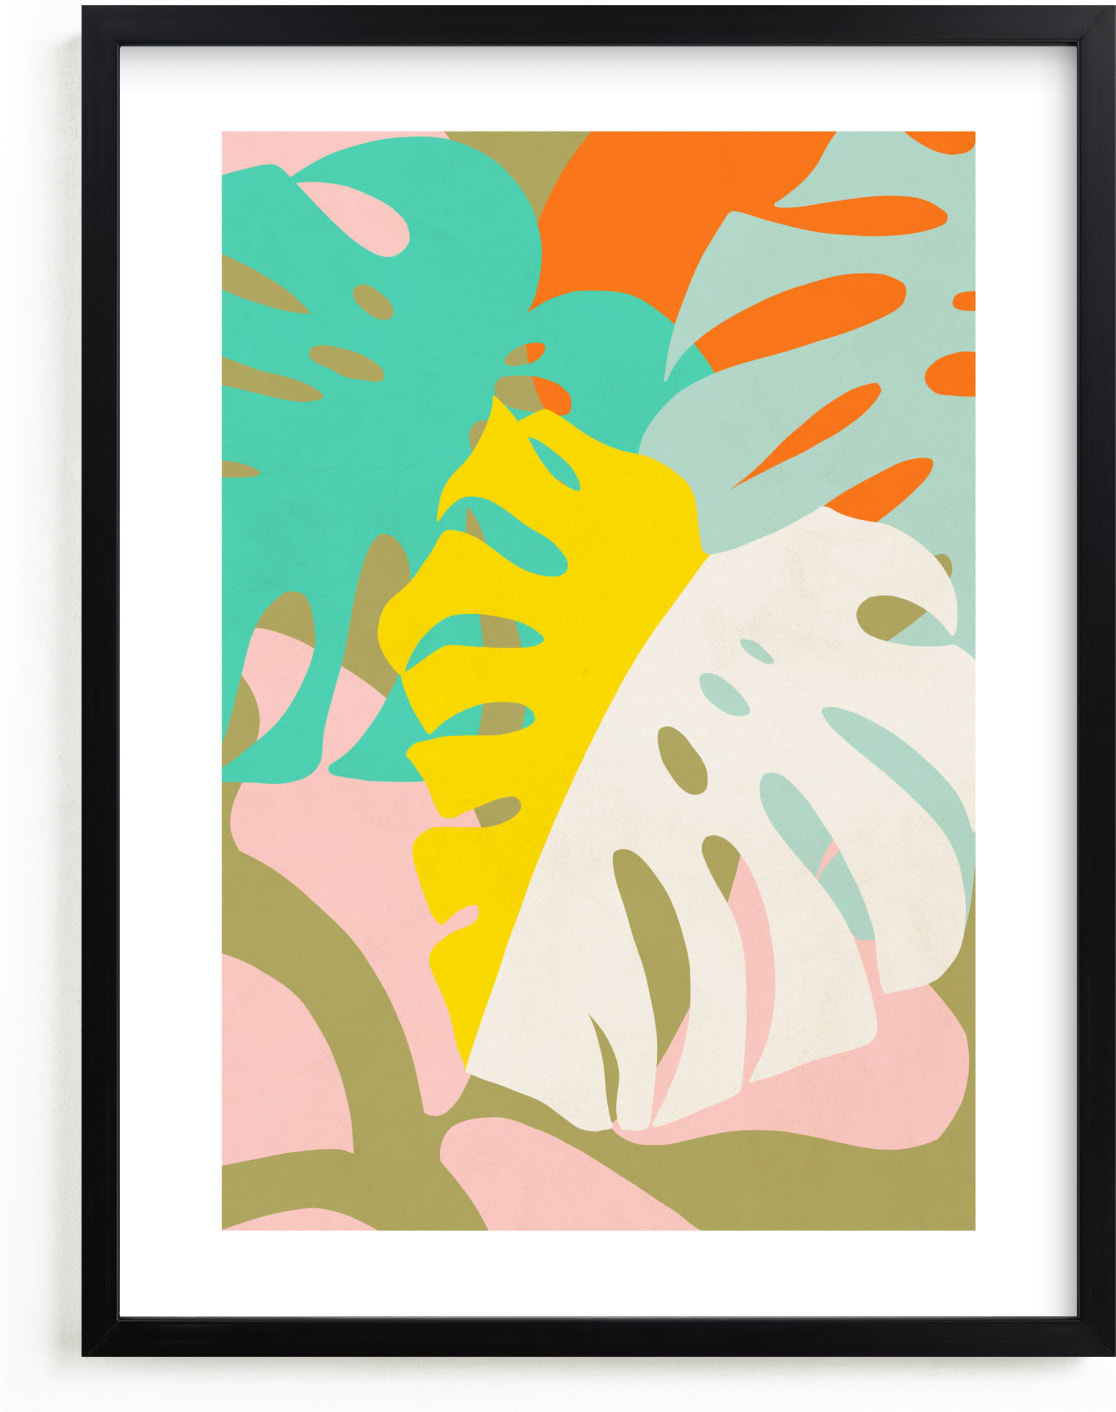 This is a colorful kids wall art by Dominique Vari called Tropical Vibes.